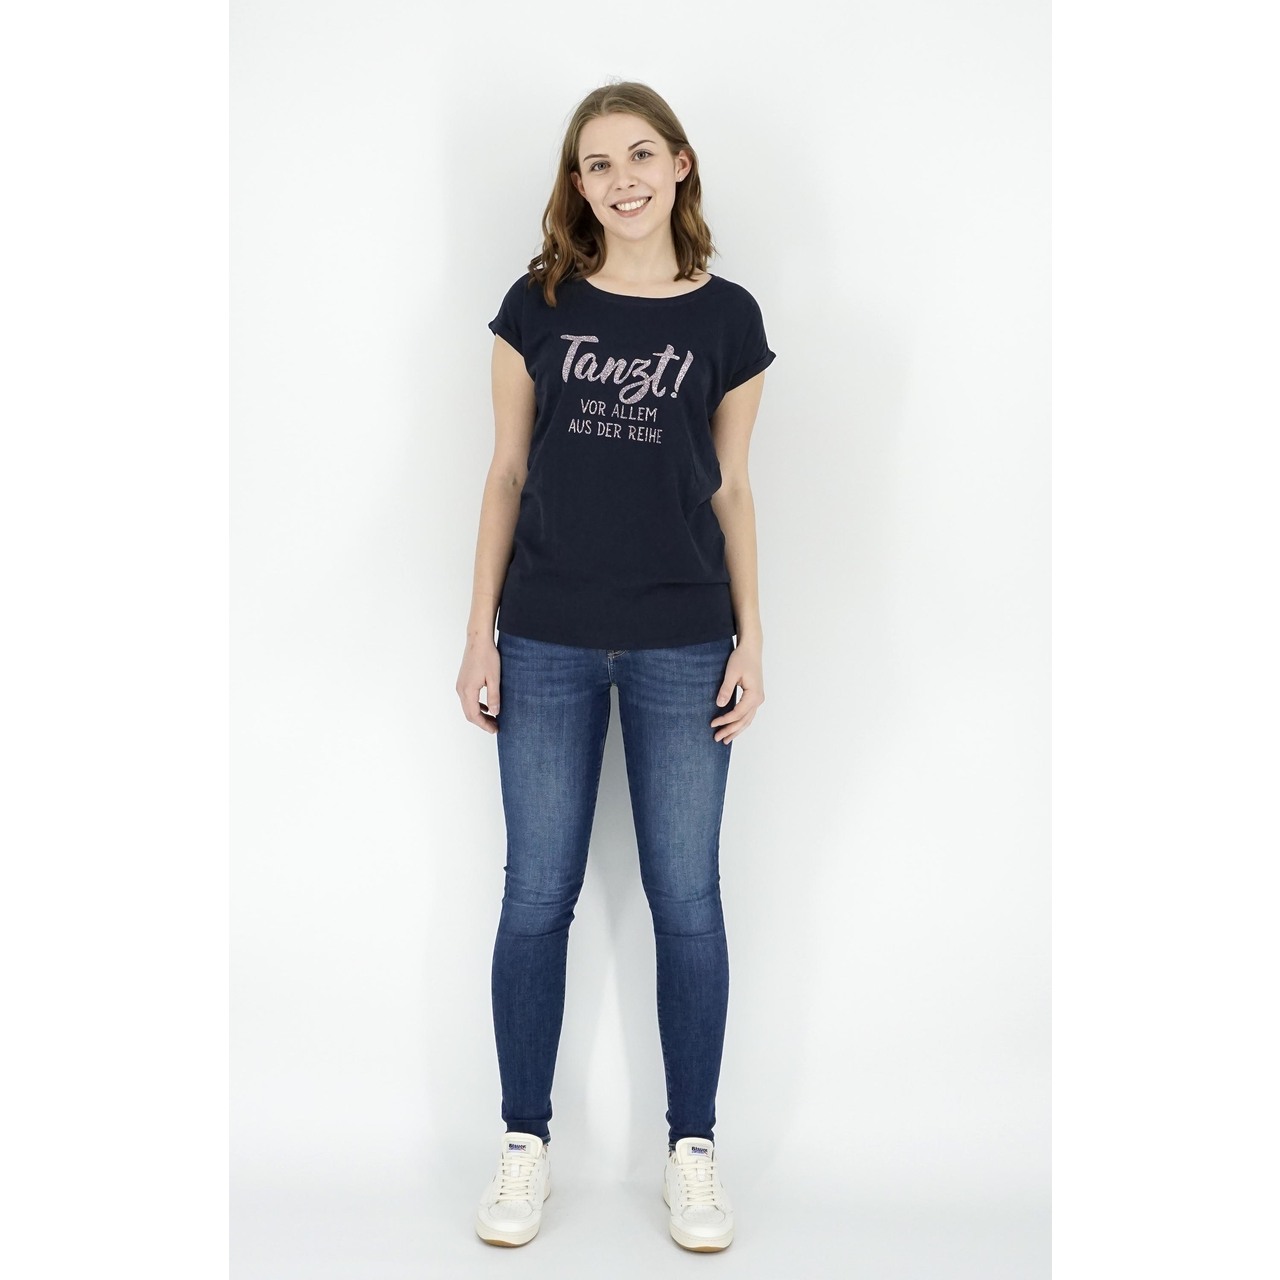 BE FAMOUS - T-SHIRT MIT SPRUCH / TANZT!